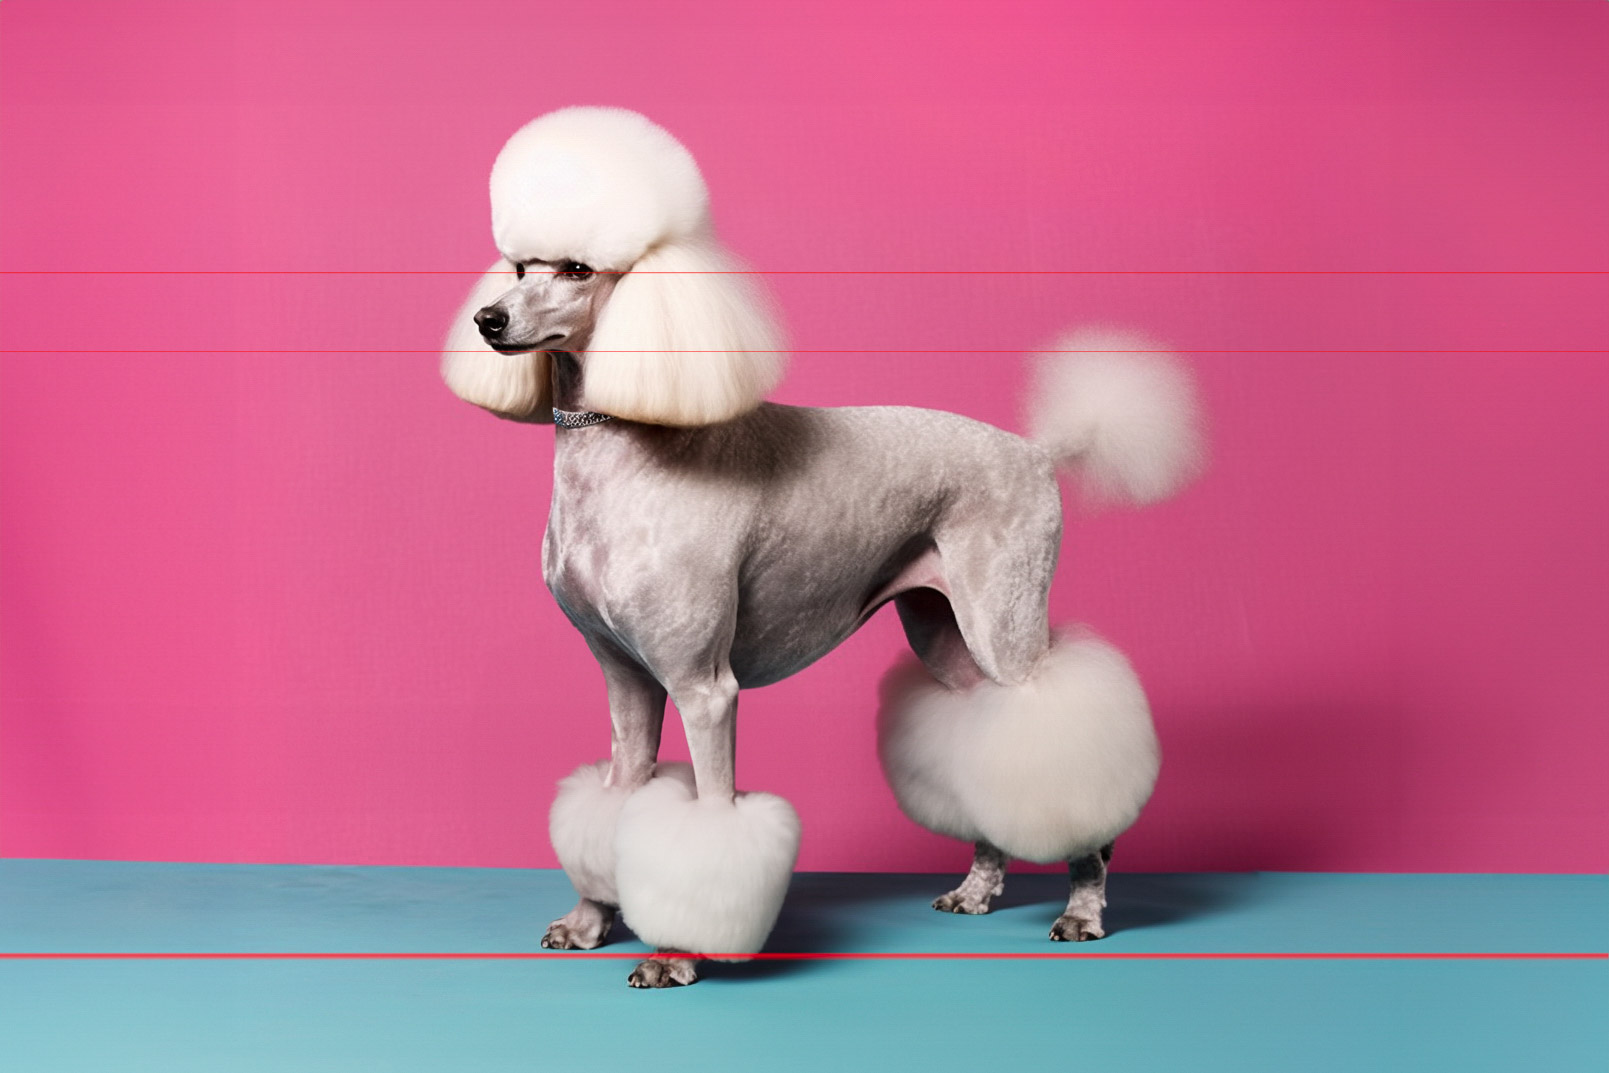 Standard Poodle art prints on paper & canvas at k9 Gallery of Art. Delightful, detailed & humorous high-quality photorealistic original images.  Explore our exhibits today!